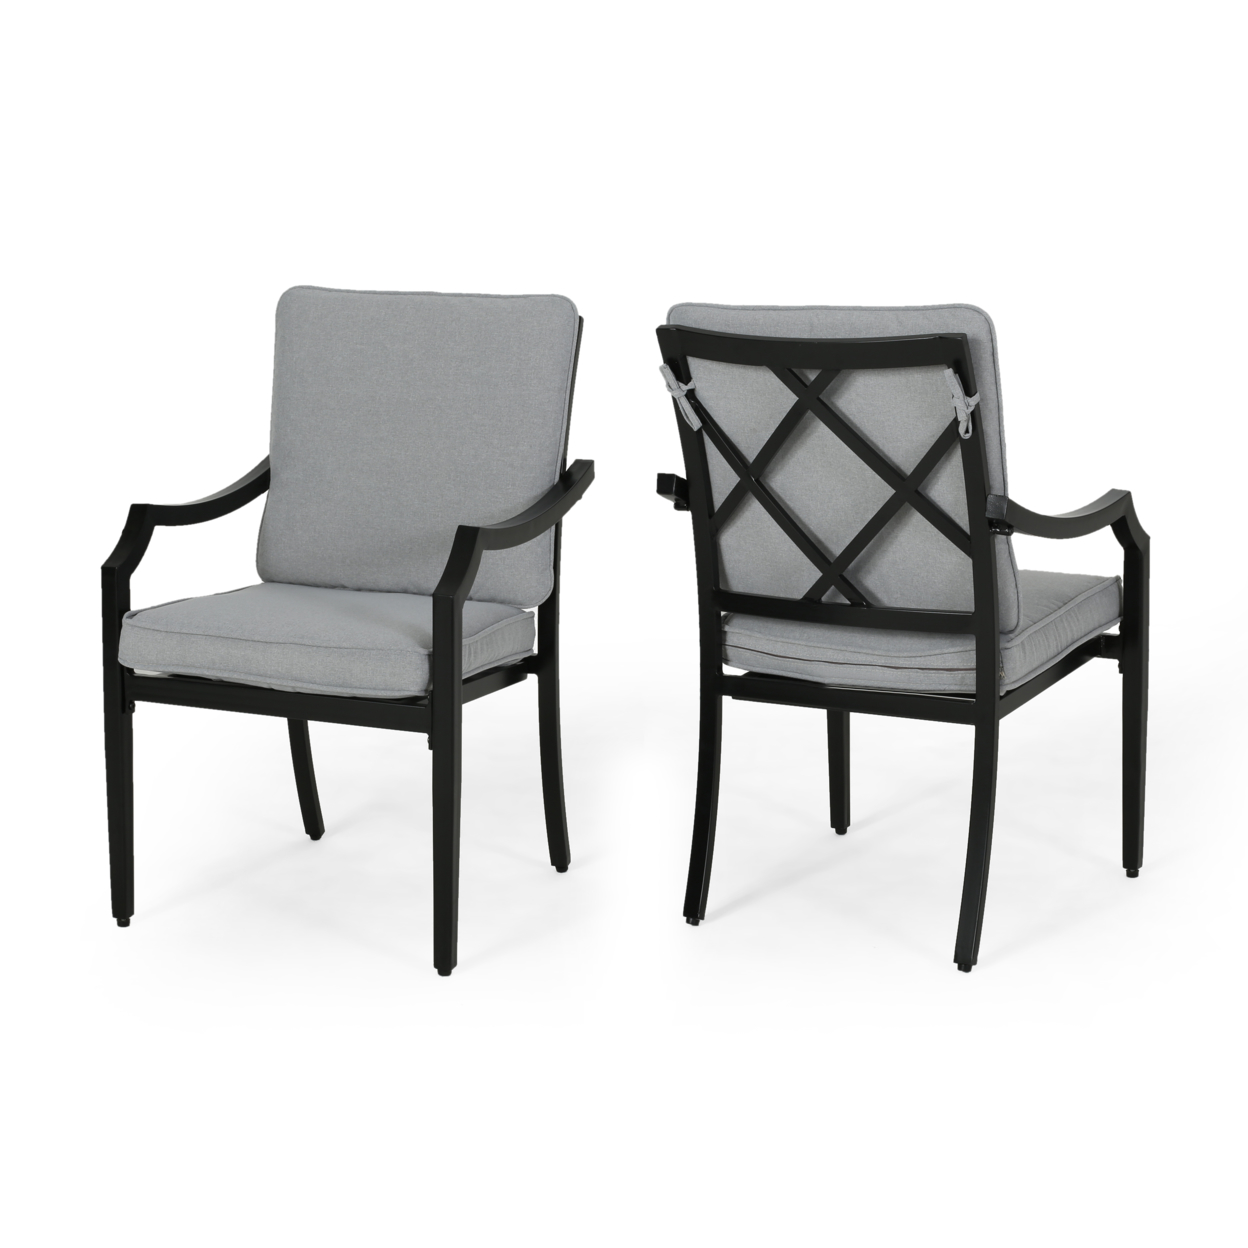 Belle Diego Outdoor Aluminum Dining Chairs With Cushions (Set Of 2) - Matte Black, Light Beige